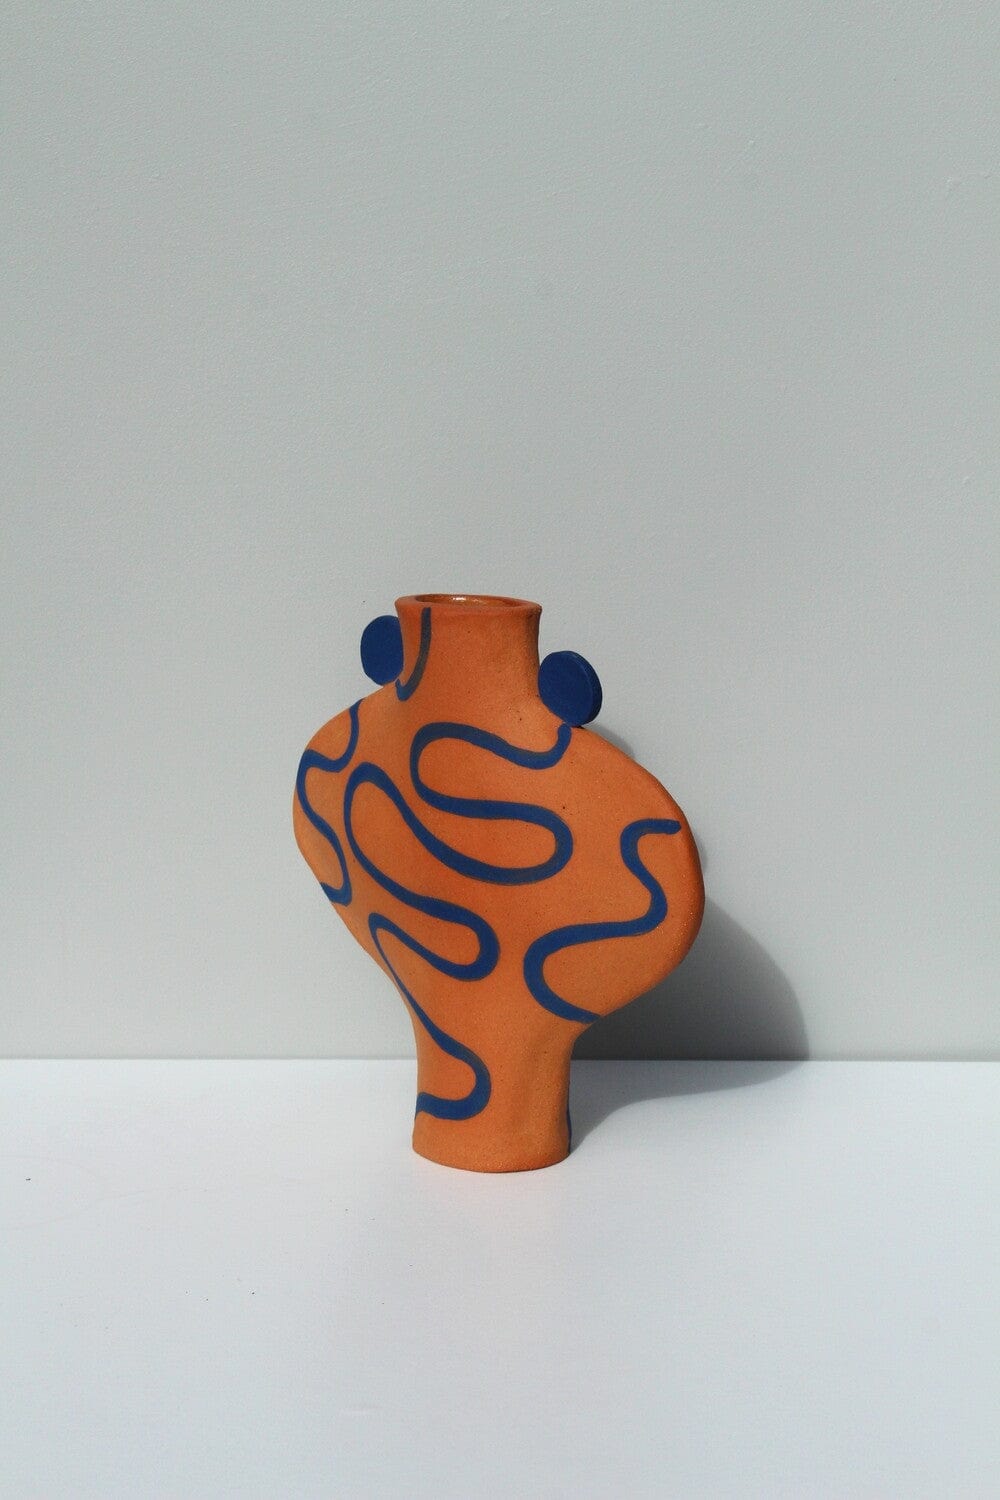 Hand Drawn Vessel In Terracotta And Blue.